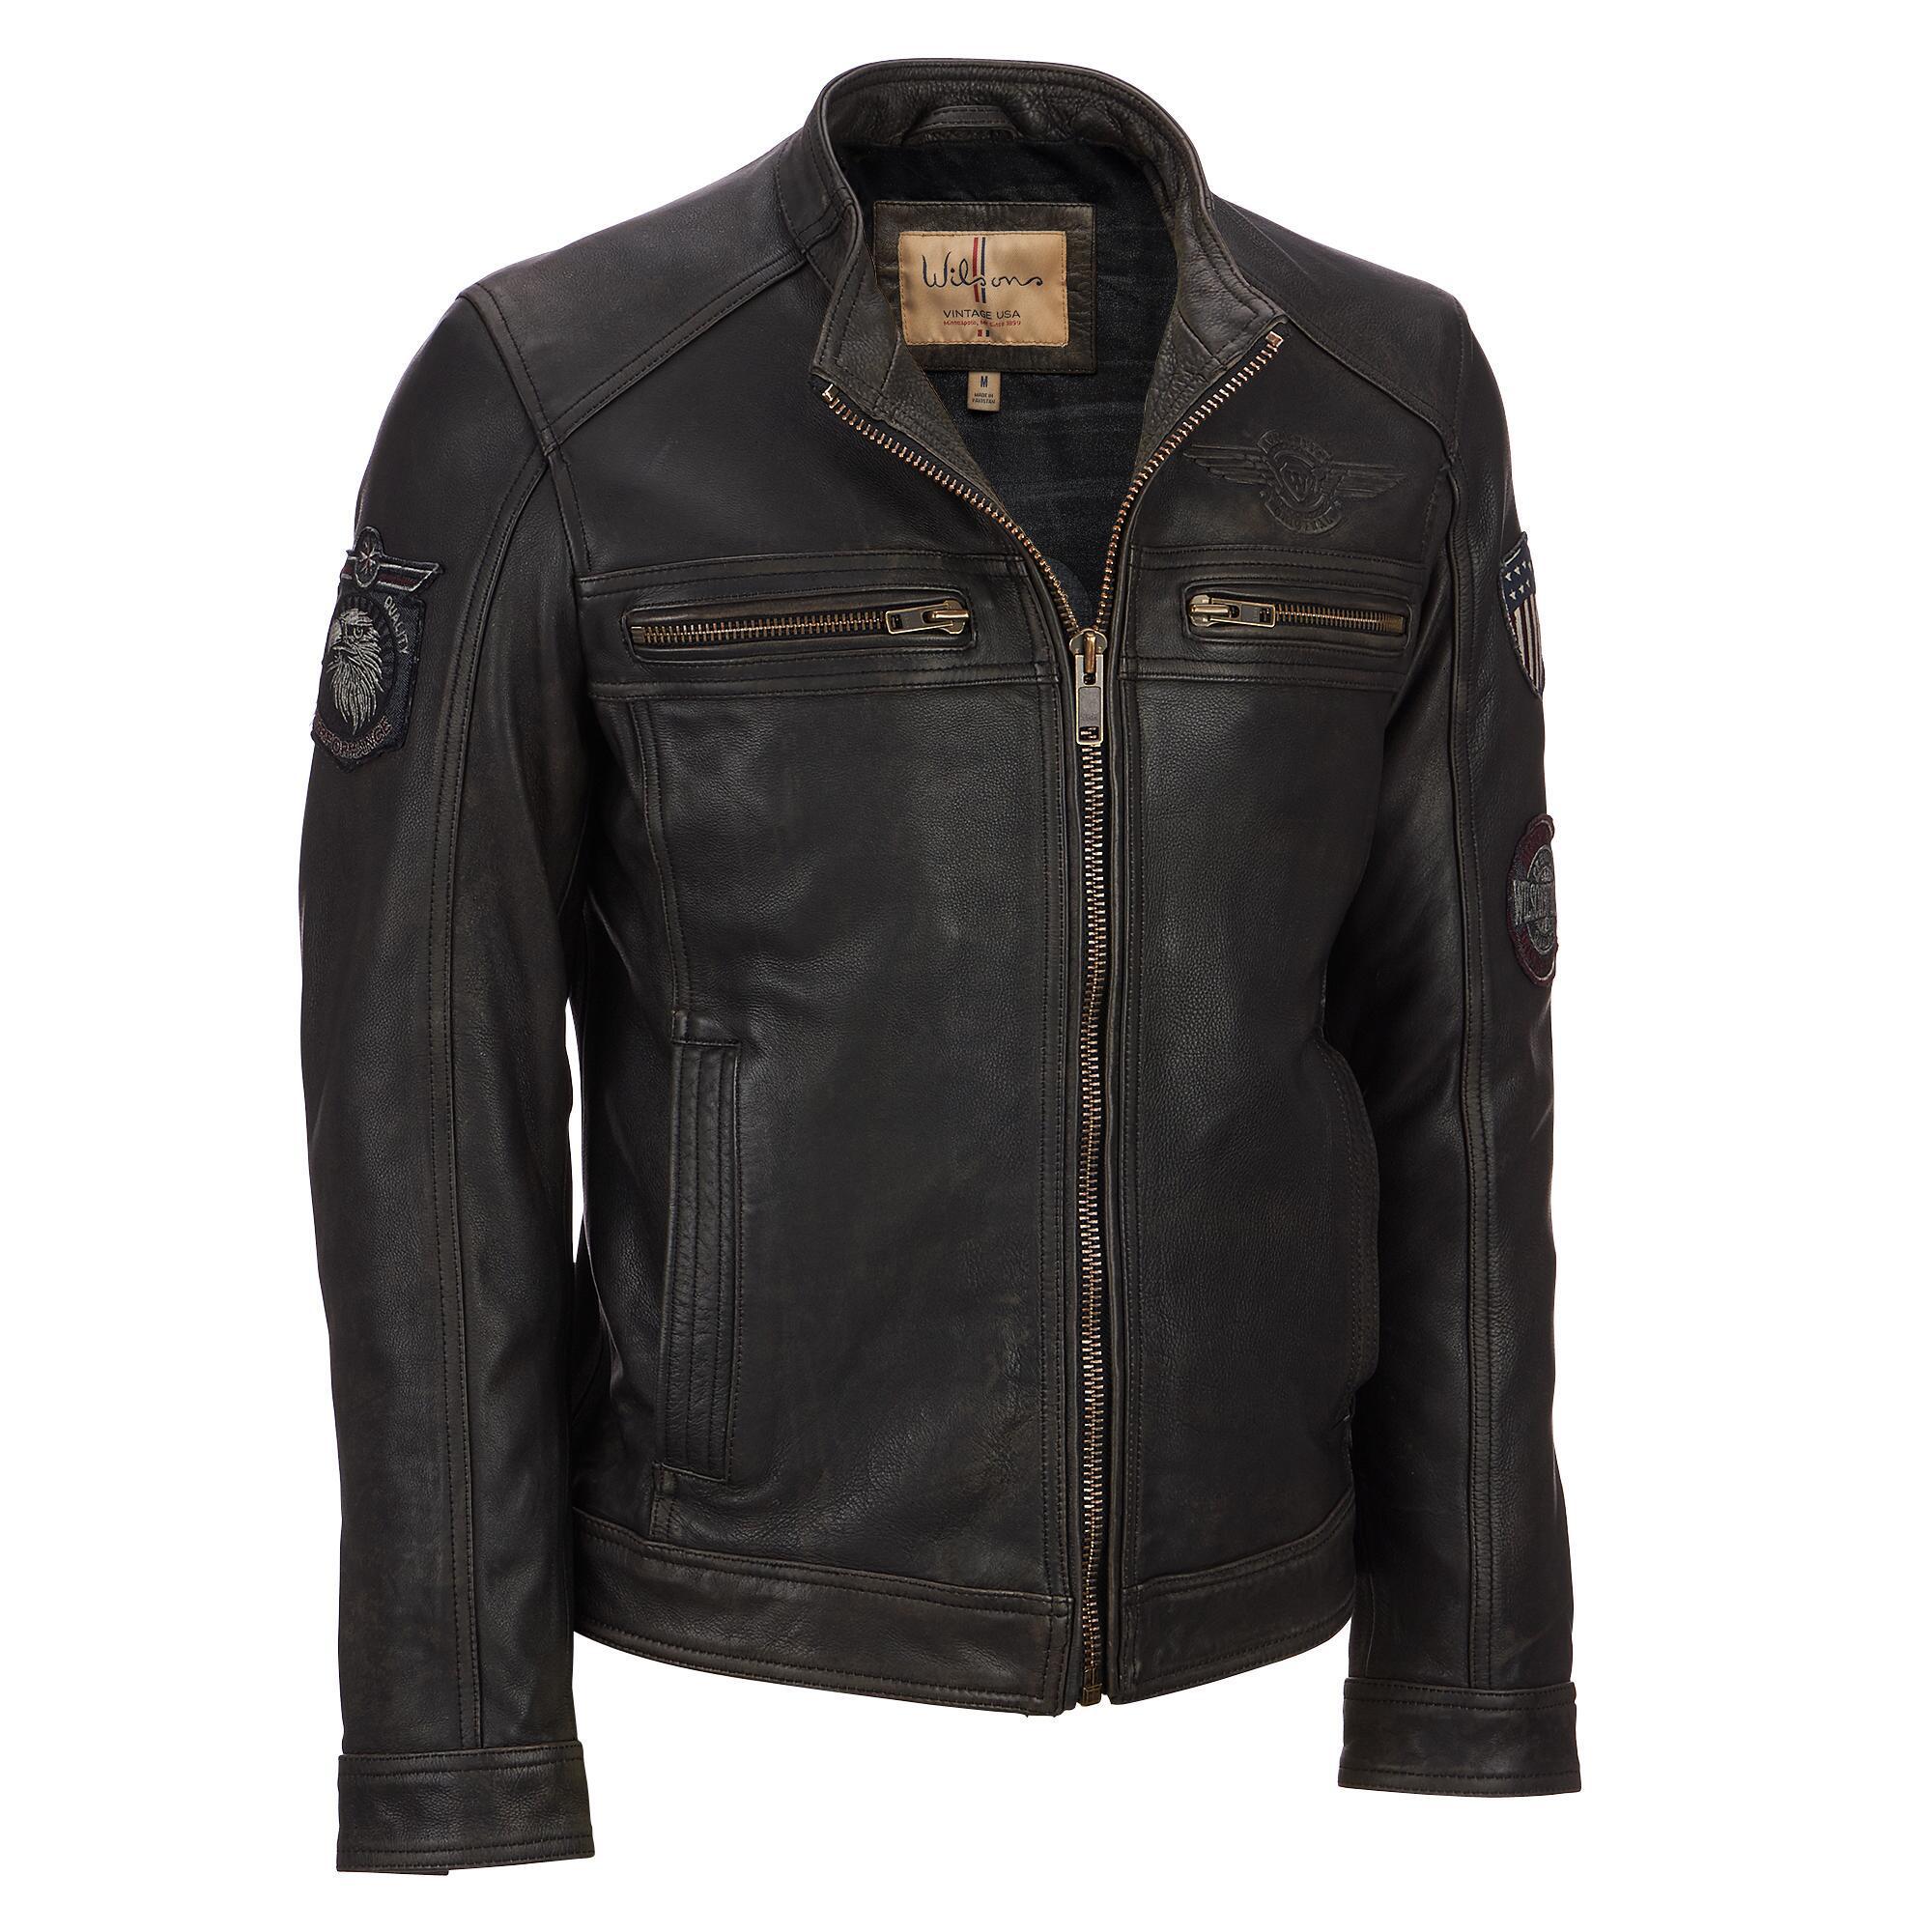 Lyst - Wilsons Leather Vintage Embossed Cycle Leather Jacket W/ Patches ...